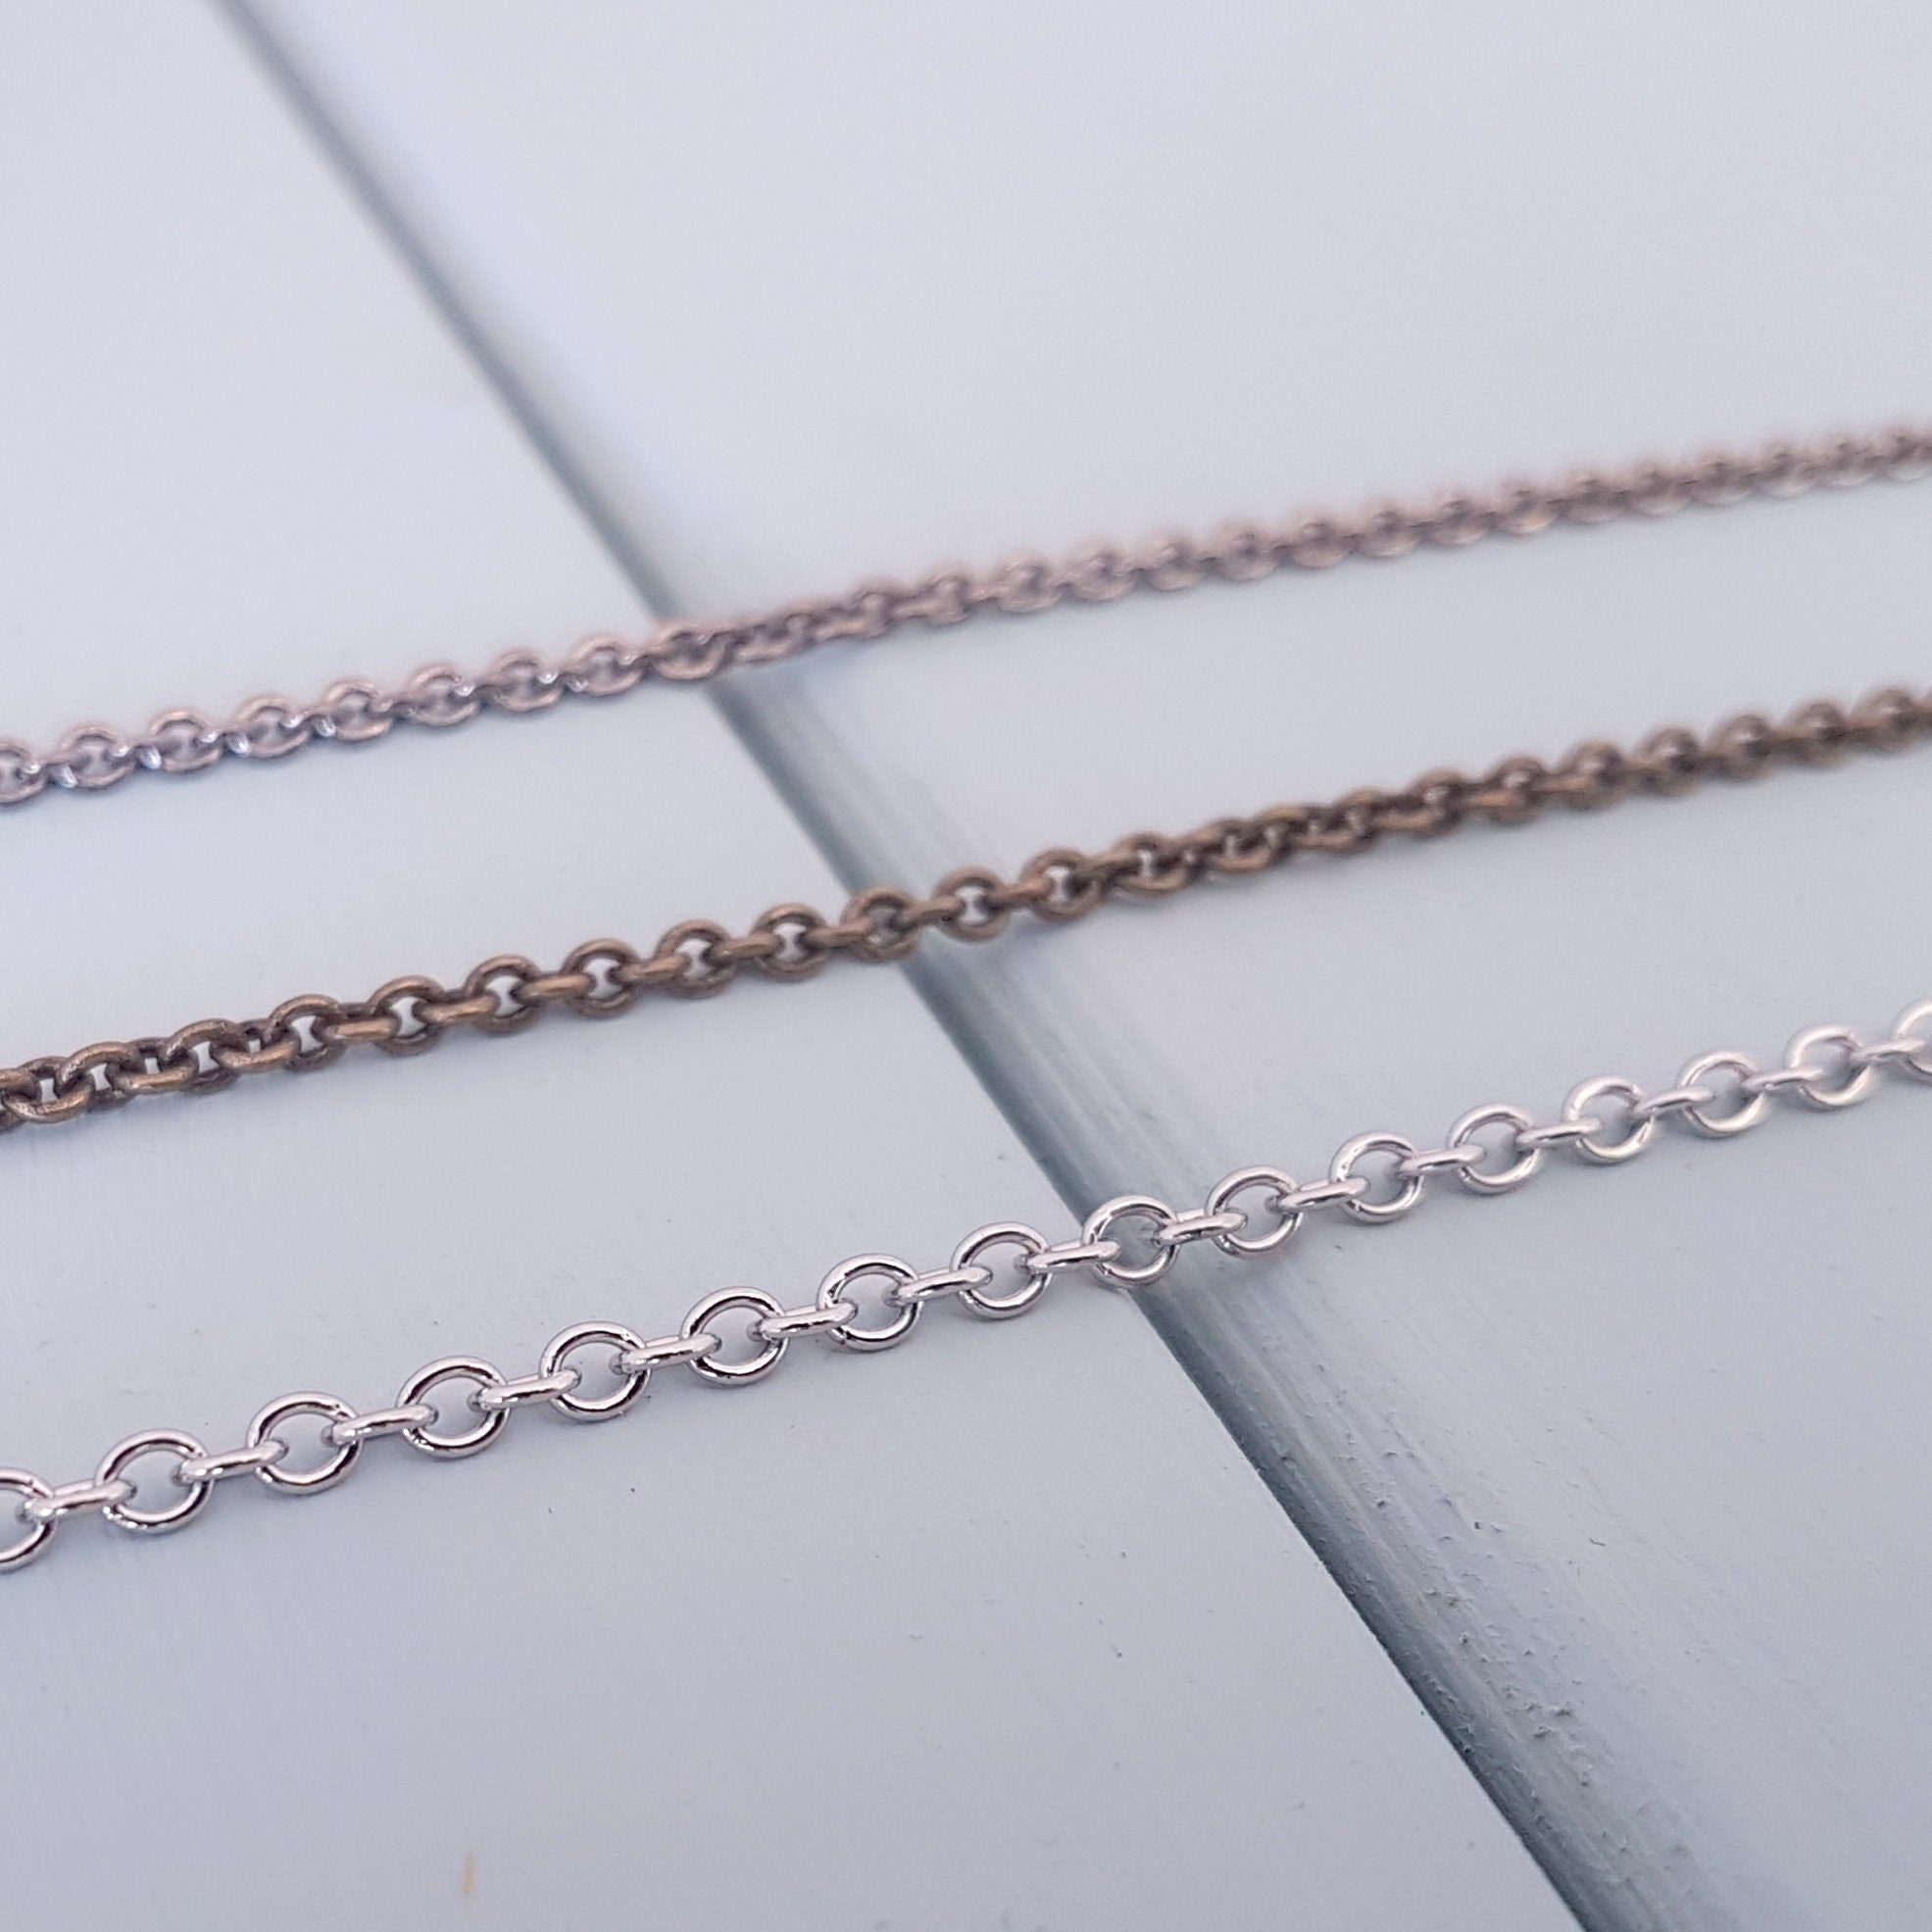 REPLACEMENT NECKLACE (CHAIN ONLY) – Very Last Detail